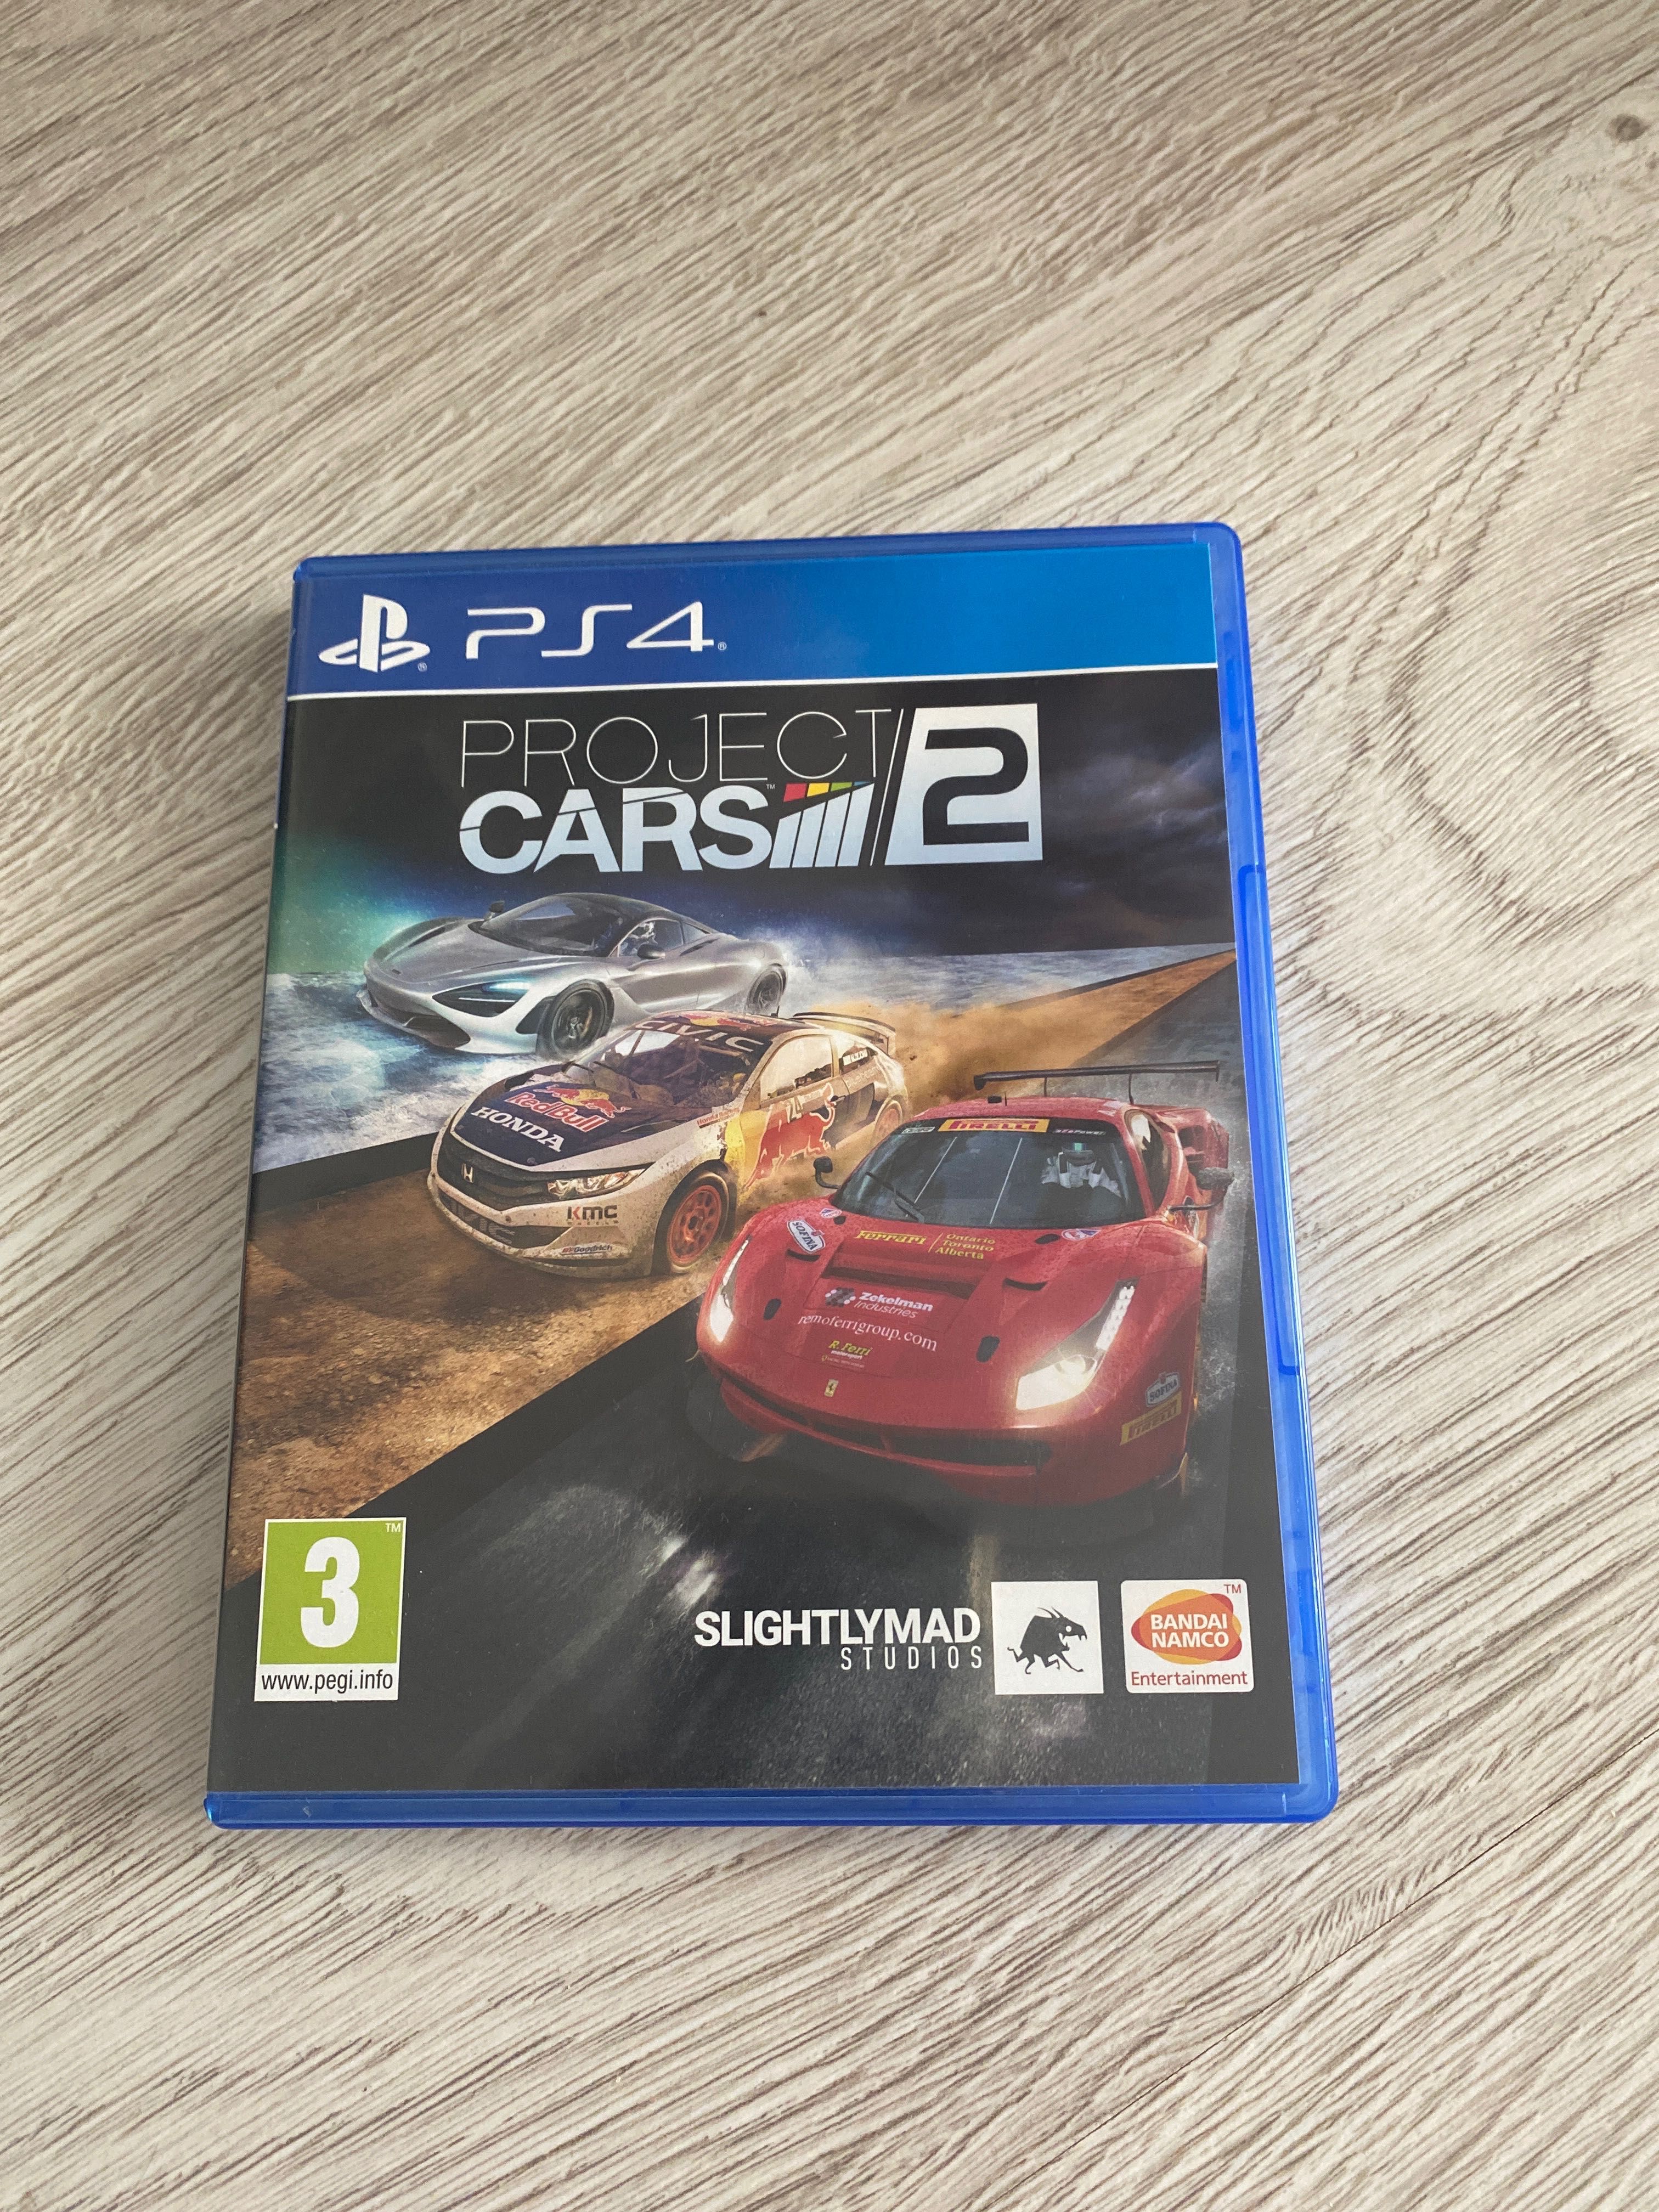 Project cars 2 ps4